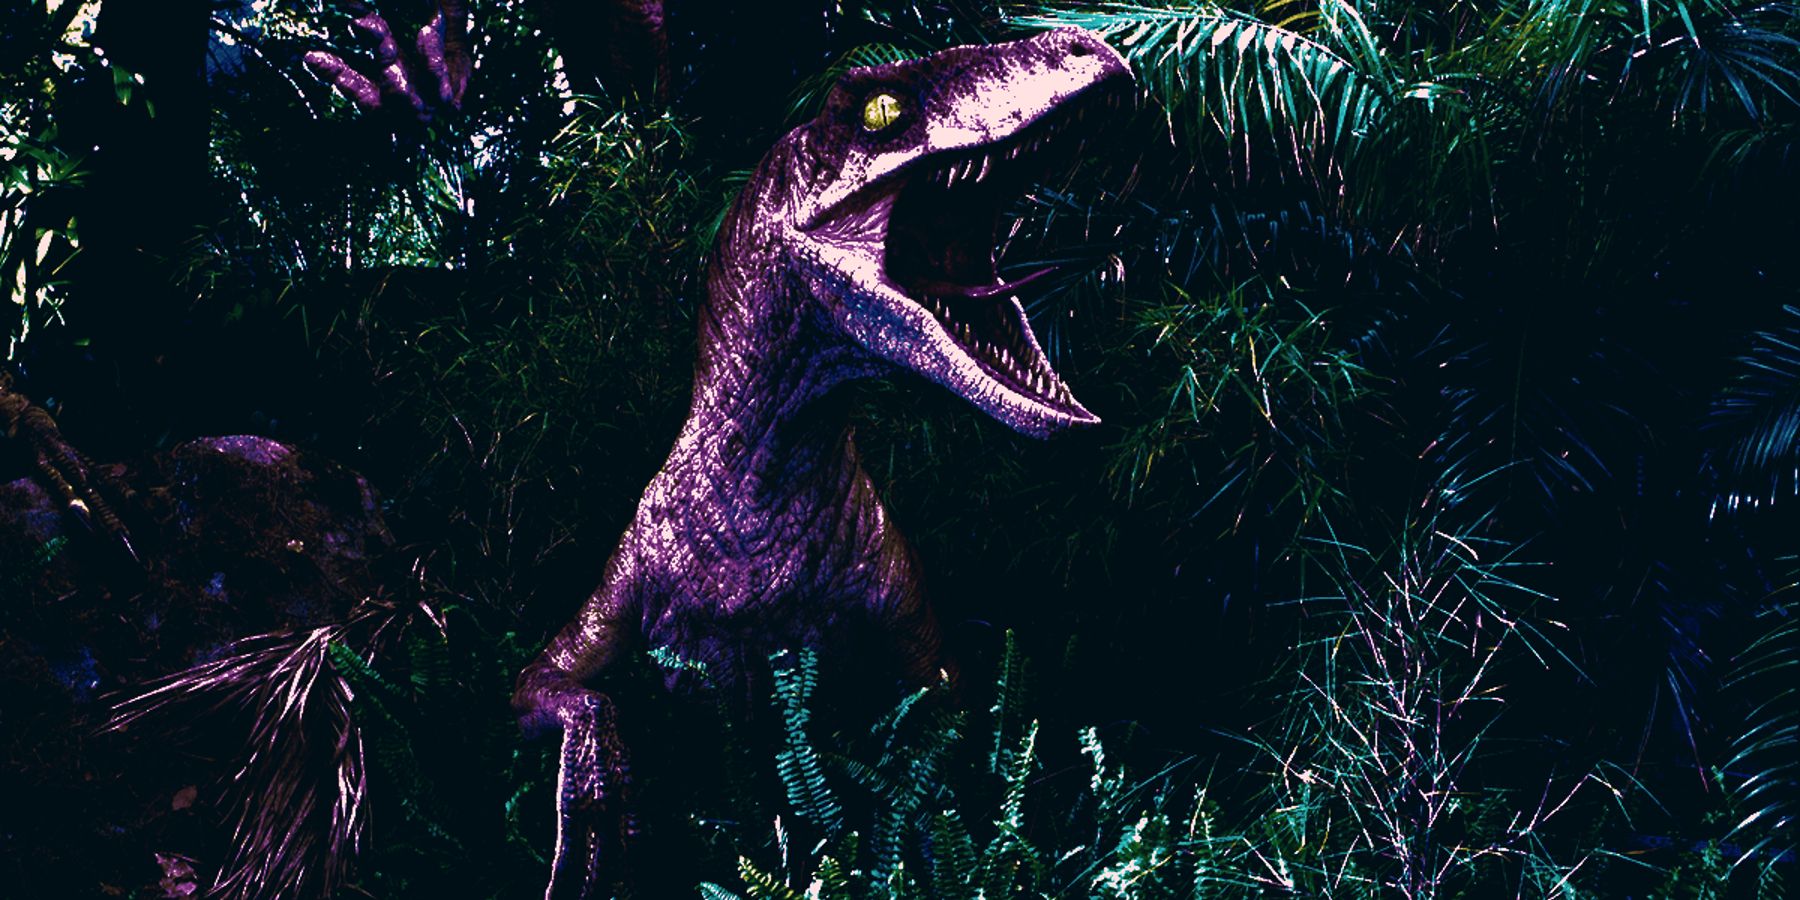 Jurassic World 10 Facts About The Velociraptors Only Hardcore Fans Know 